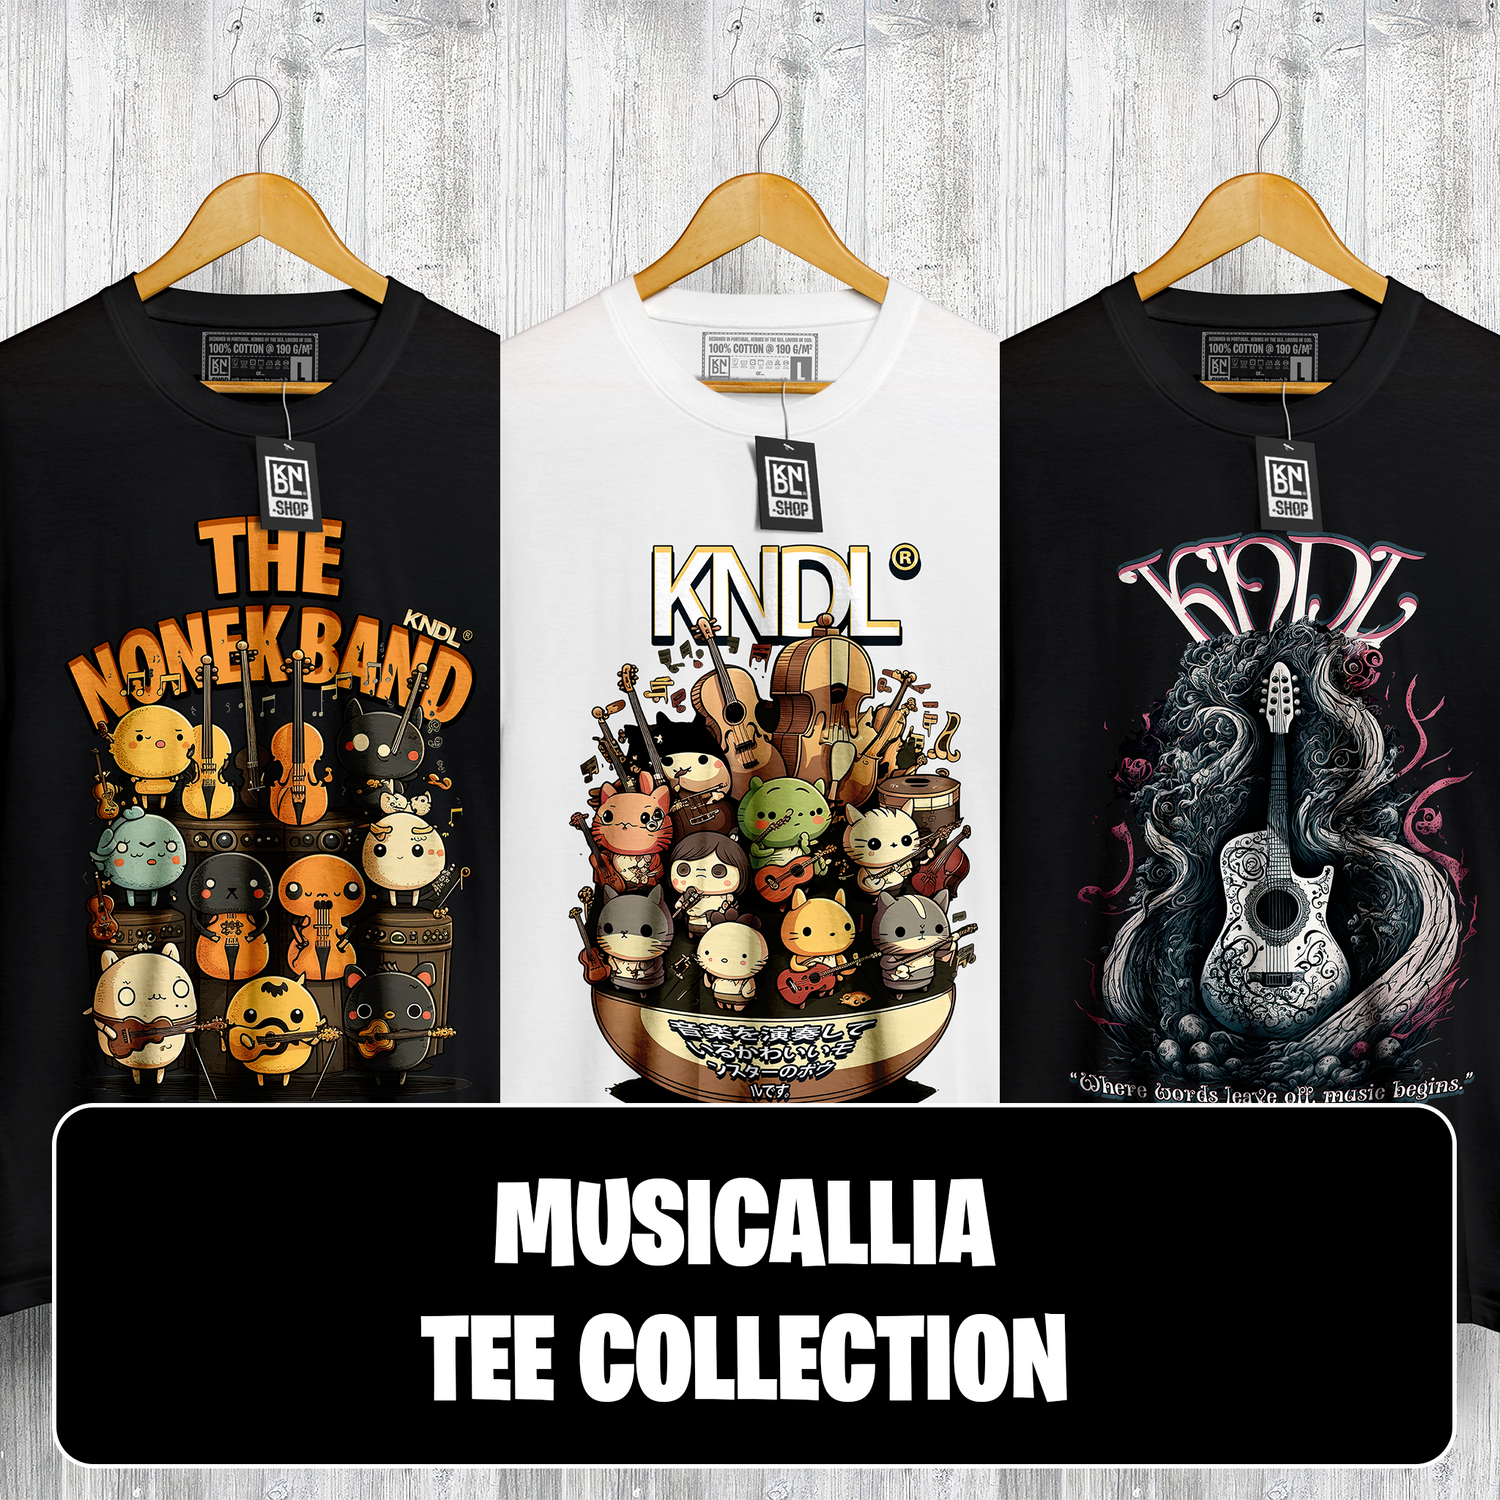 Musicallia Tee Collection by KNDL®